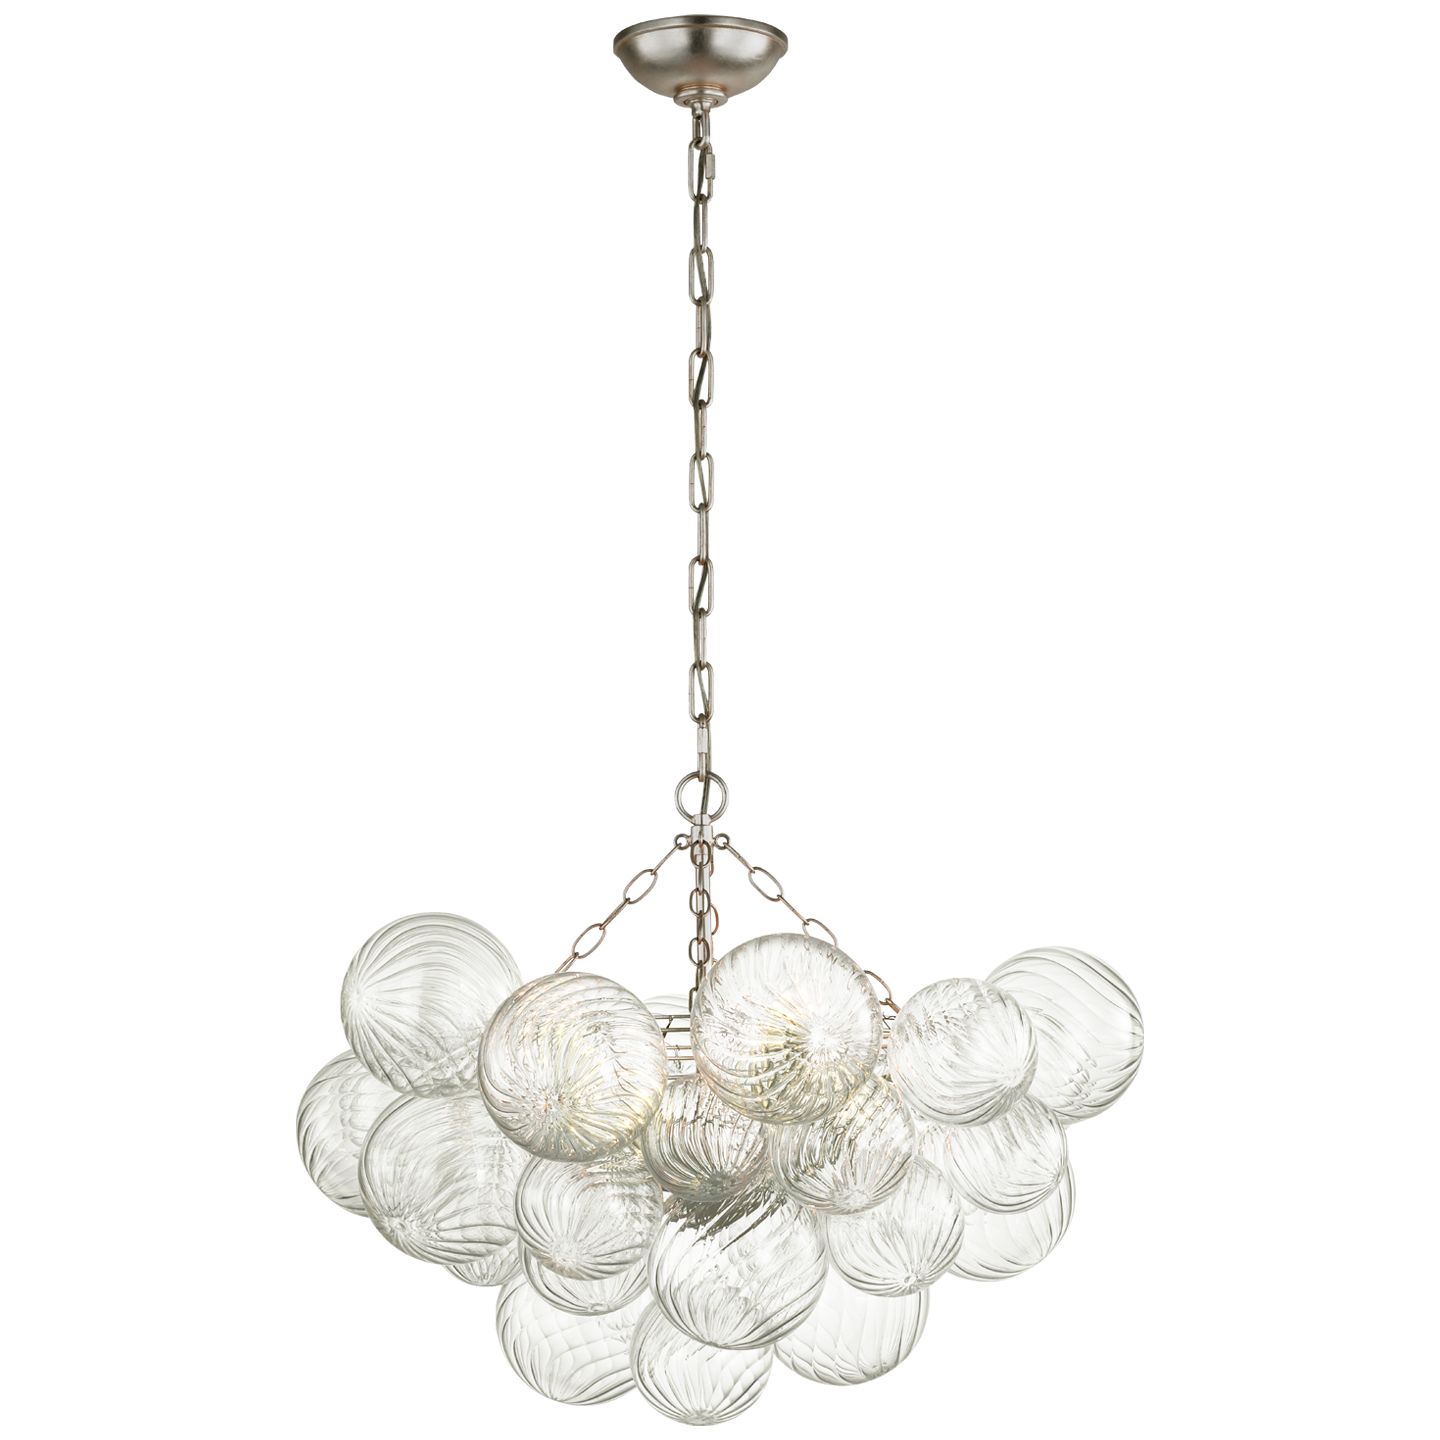 Talia Medium Chandelier in Burnished Silver Leaf and Clear Swirled Glass | Visual Comfort